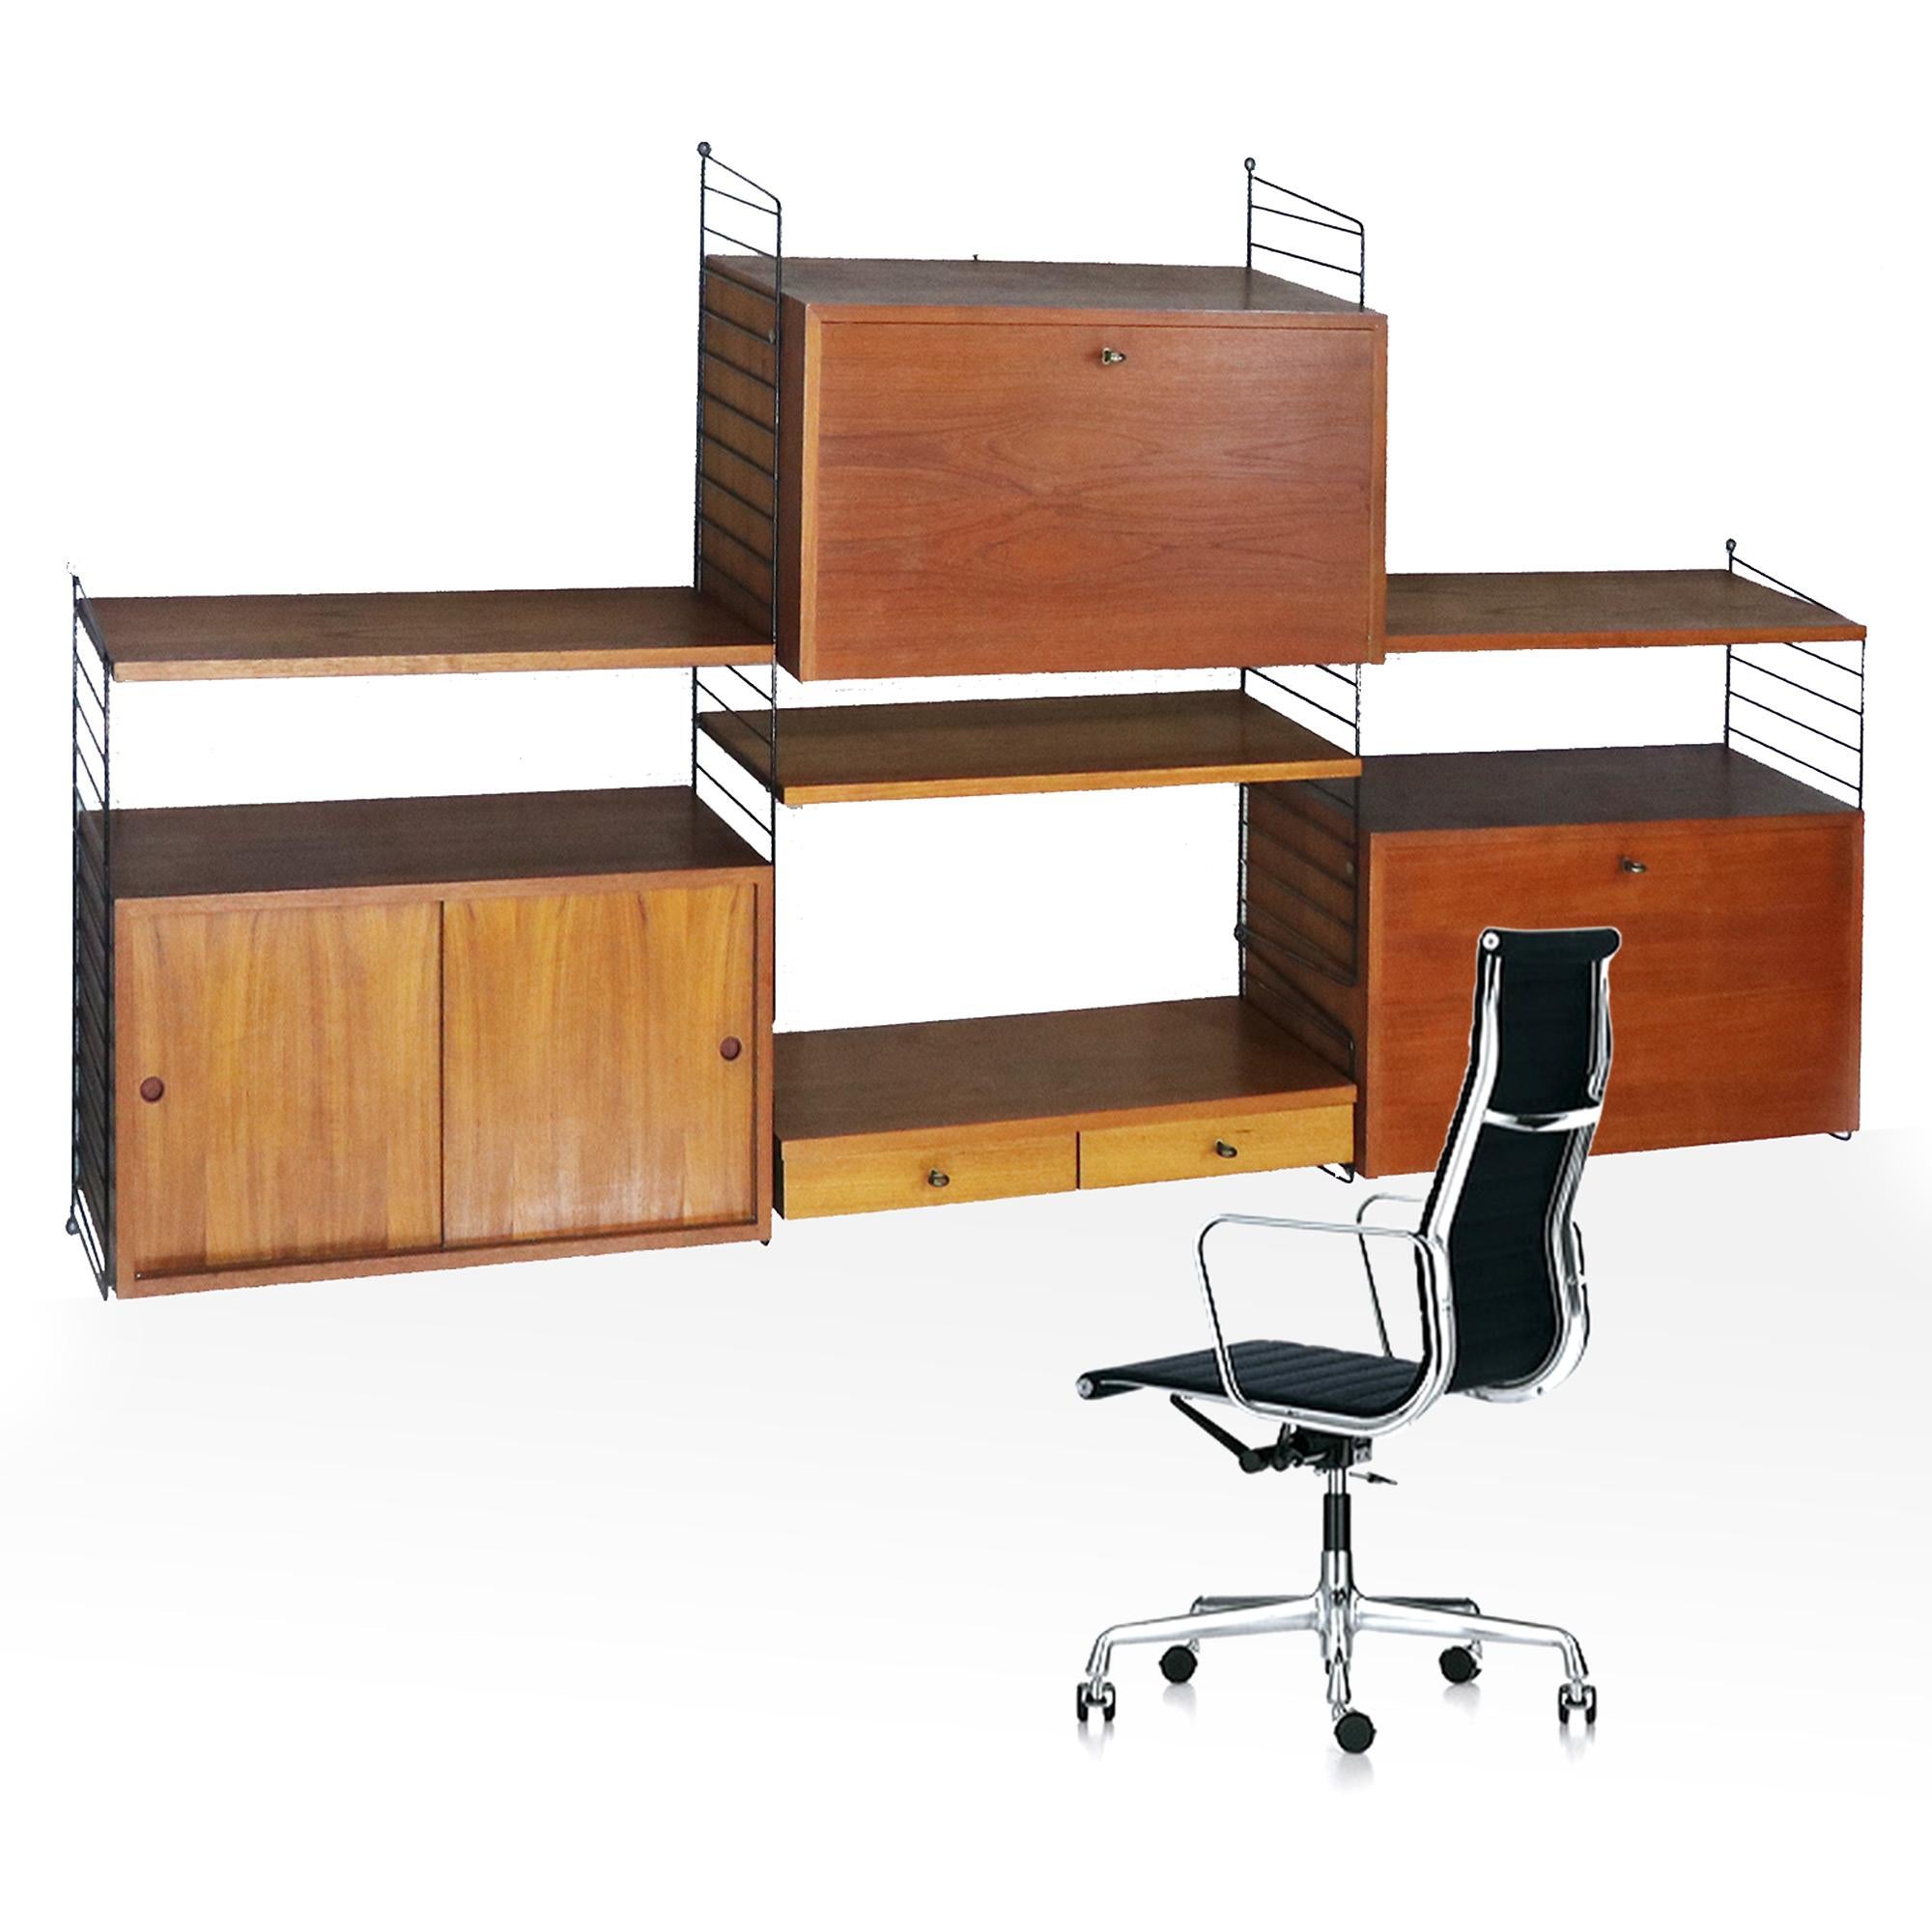 Modular and adaptable shelving system consisting of teak shelving mounted between ladder elements in black lacquered wire steel, three cabinets and one desk / board with two drawers in teak.
The wall unit is easy to install and stabile, can be